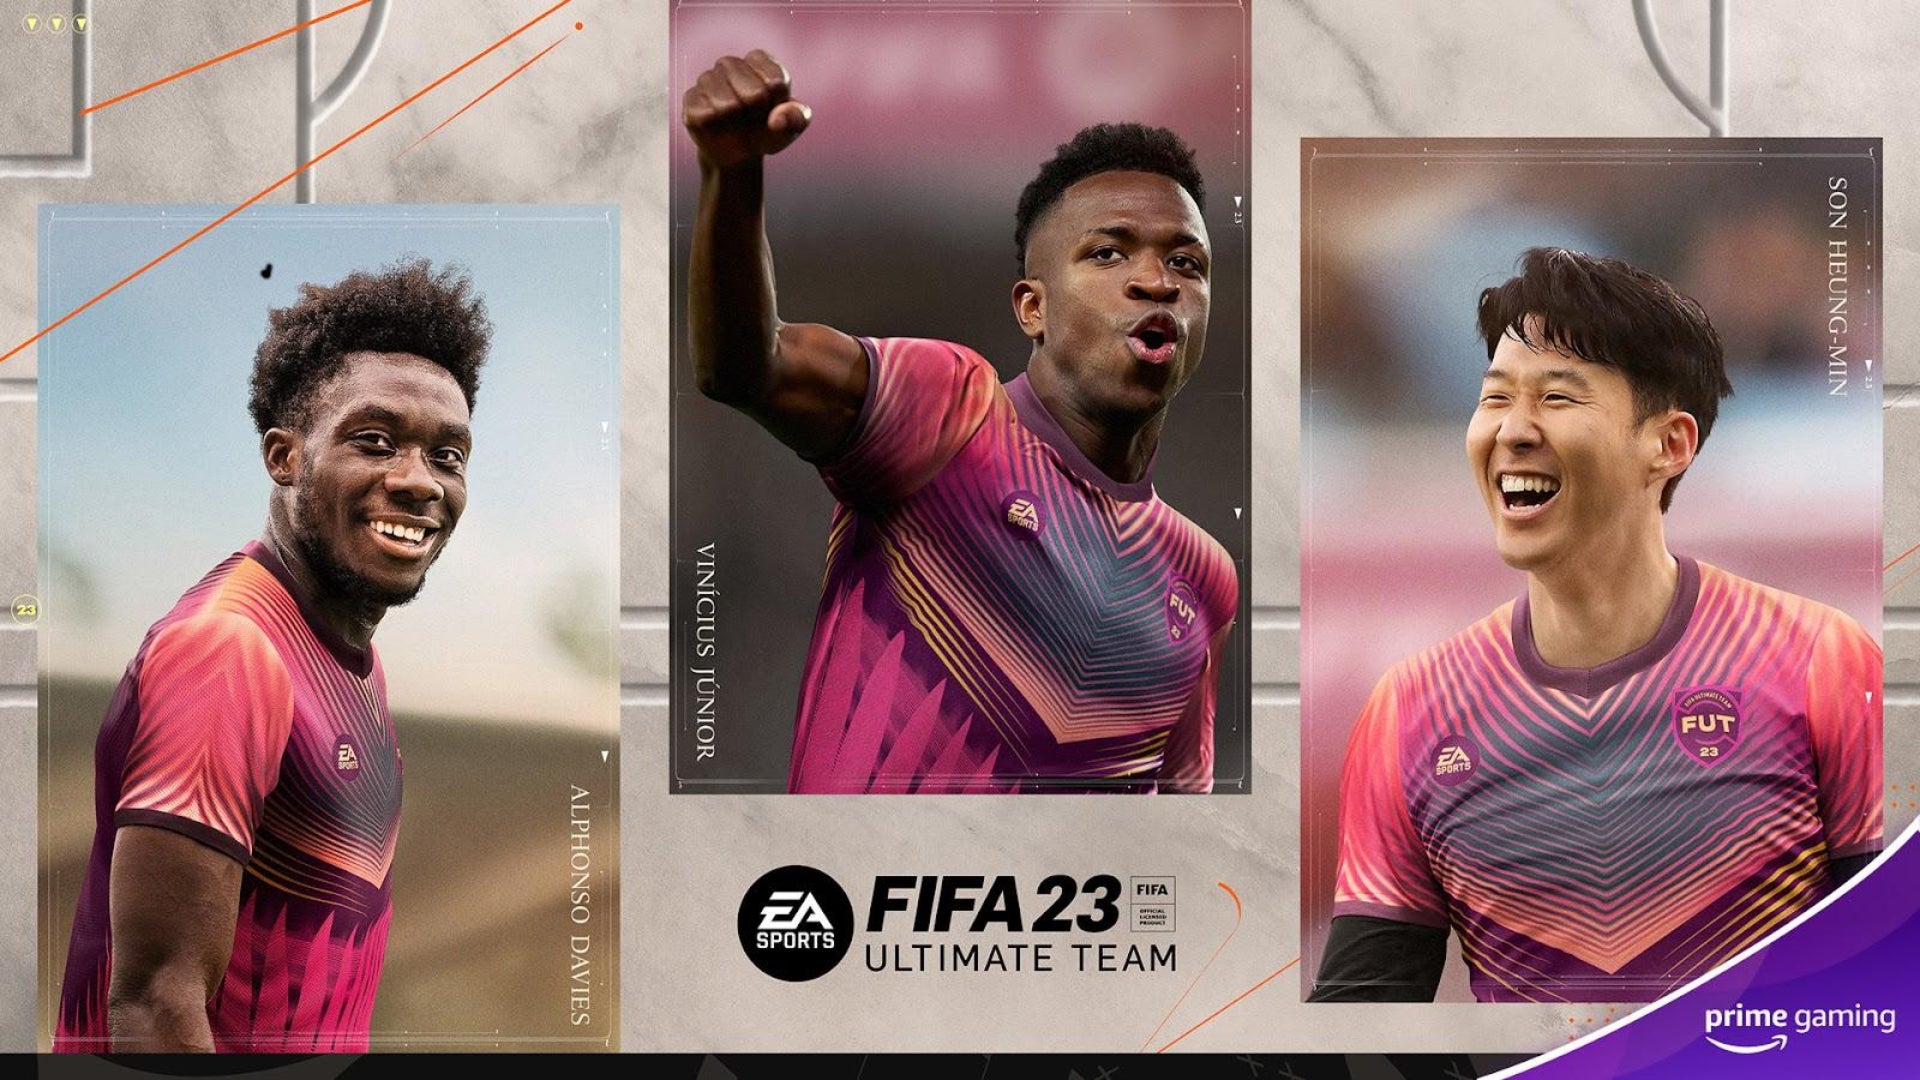 Image for Get a free FIFA 23 Ultimate Team pack with Prime Gaming this month